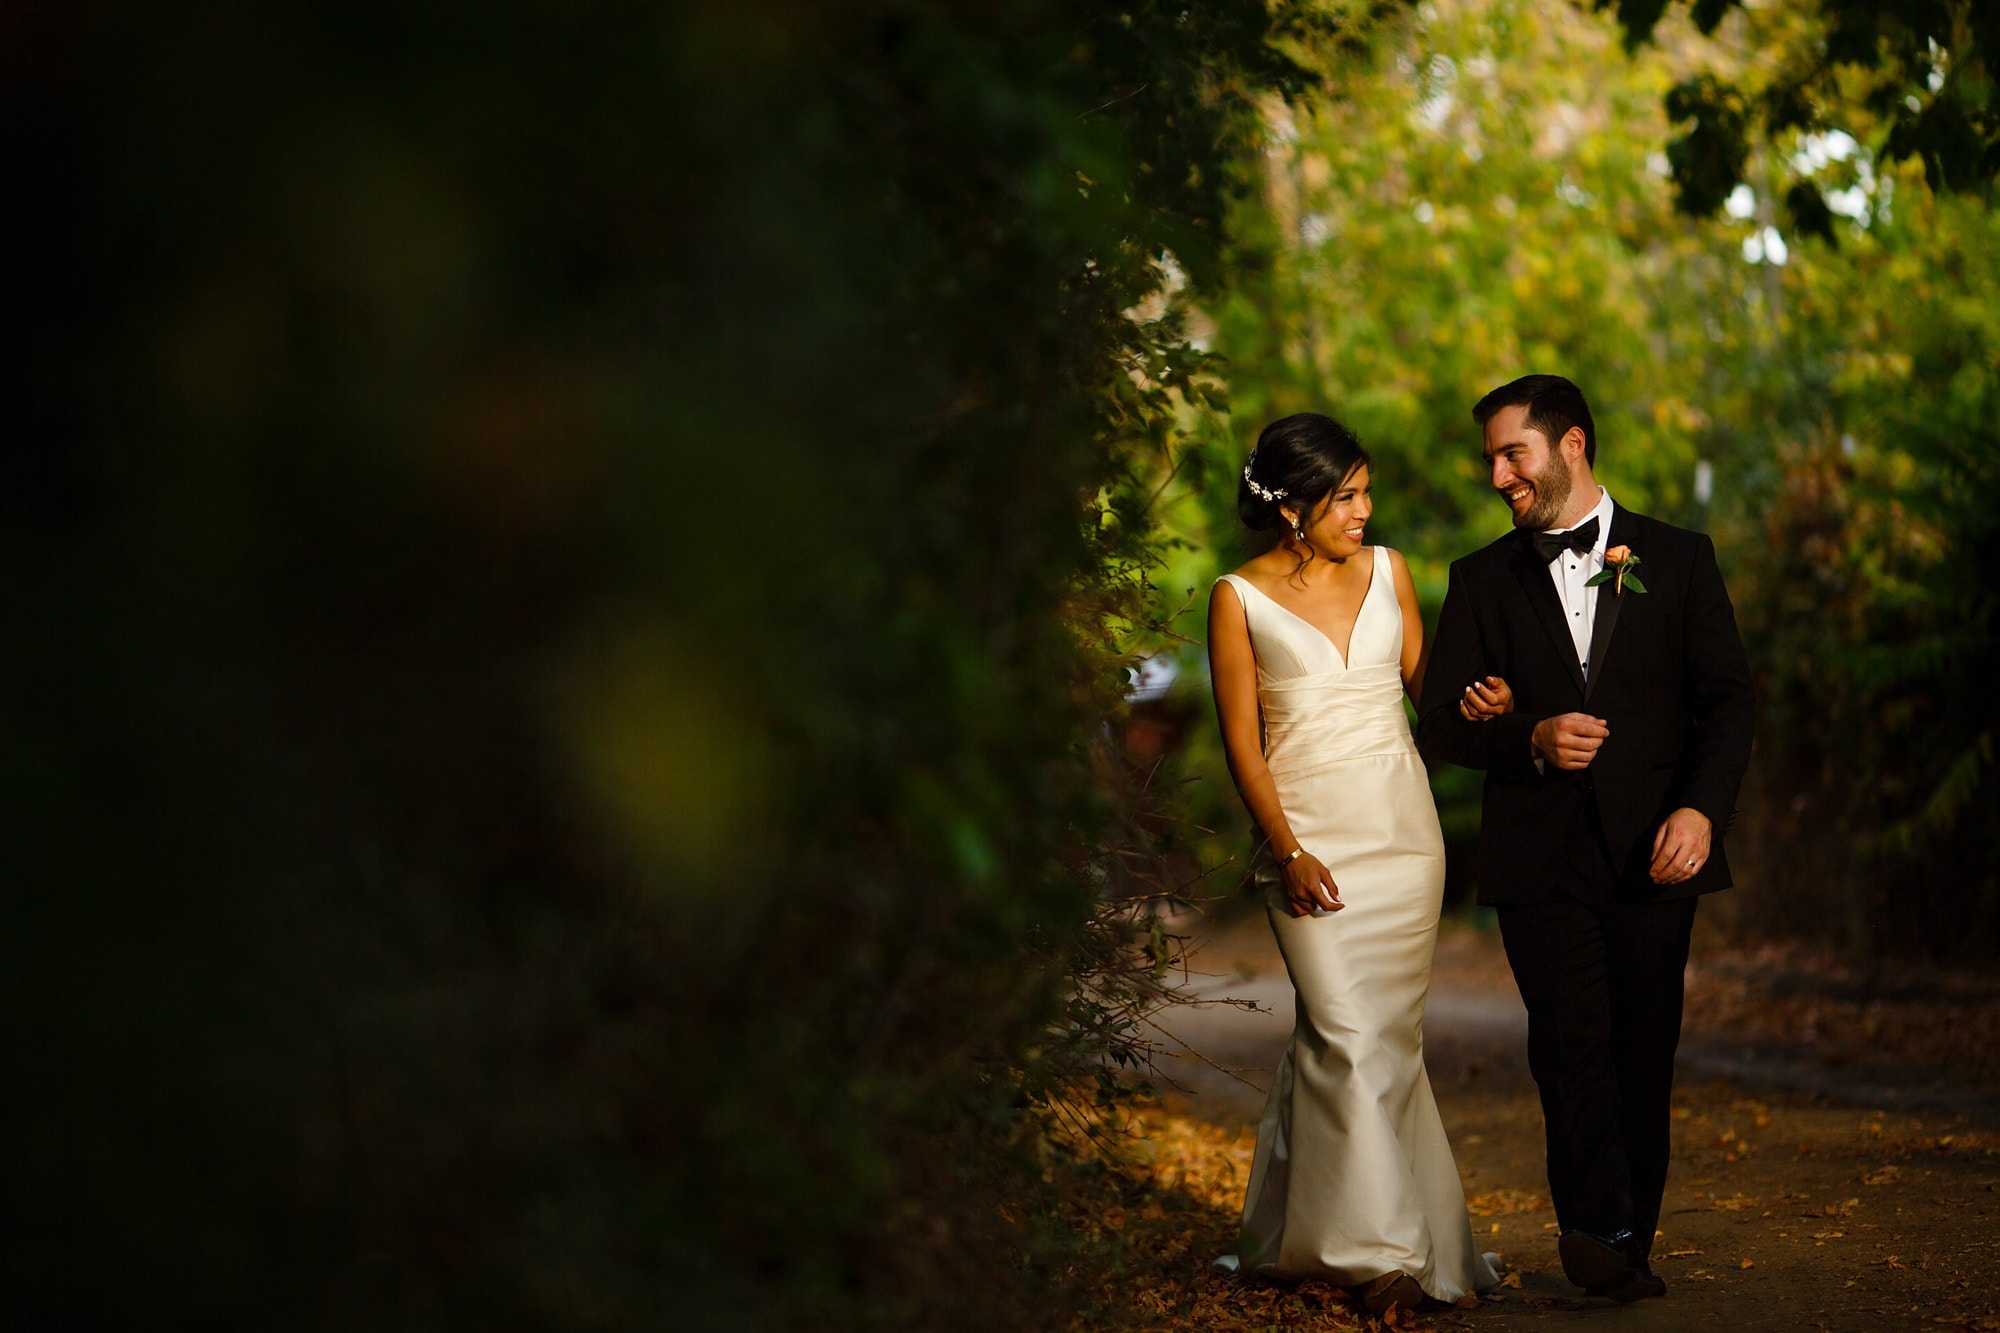 Bryan and Megan share a moment together in the last light following their fall wedding